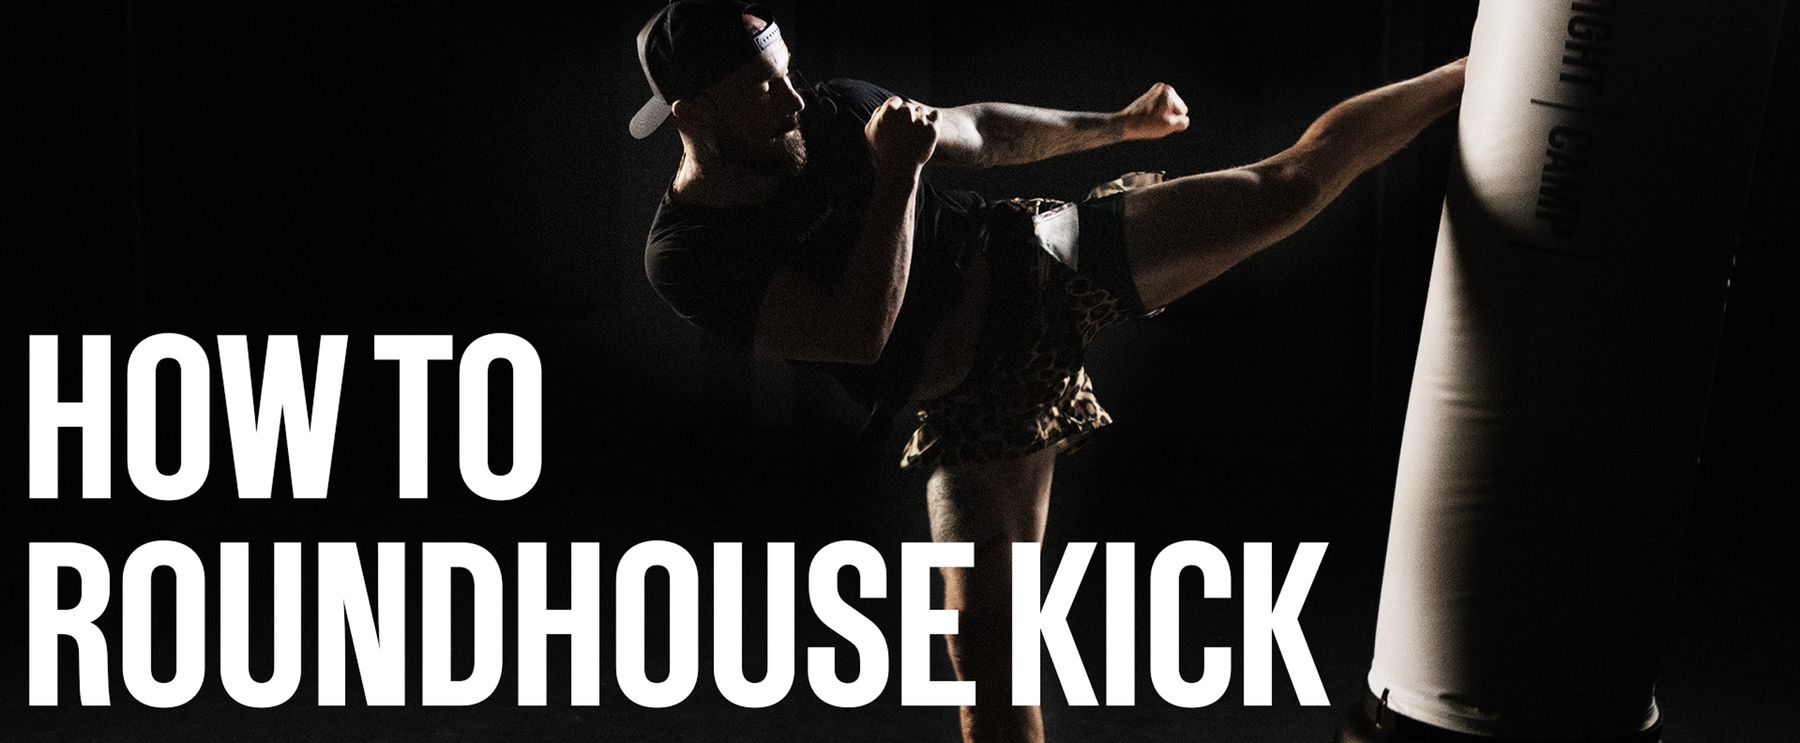 How To Do a Roundhouse Kick In Kickboxing